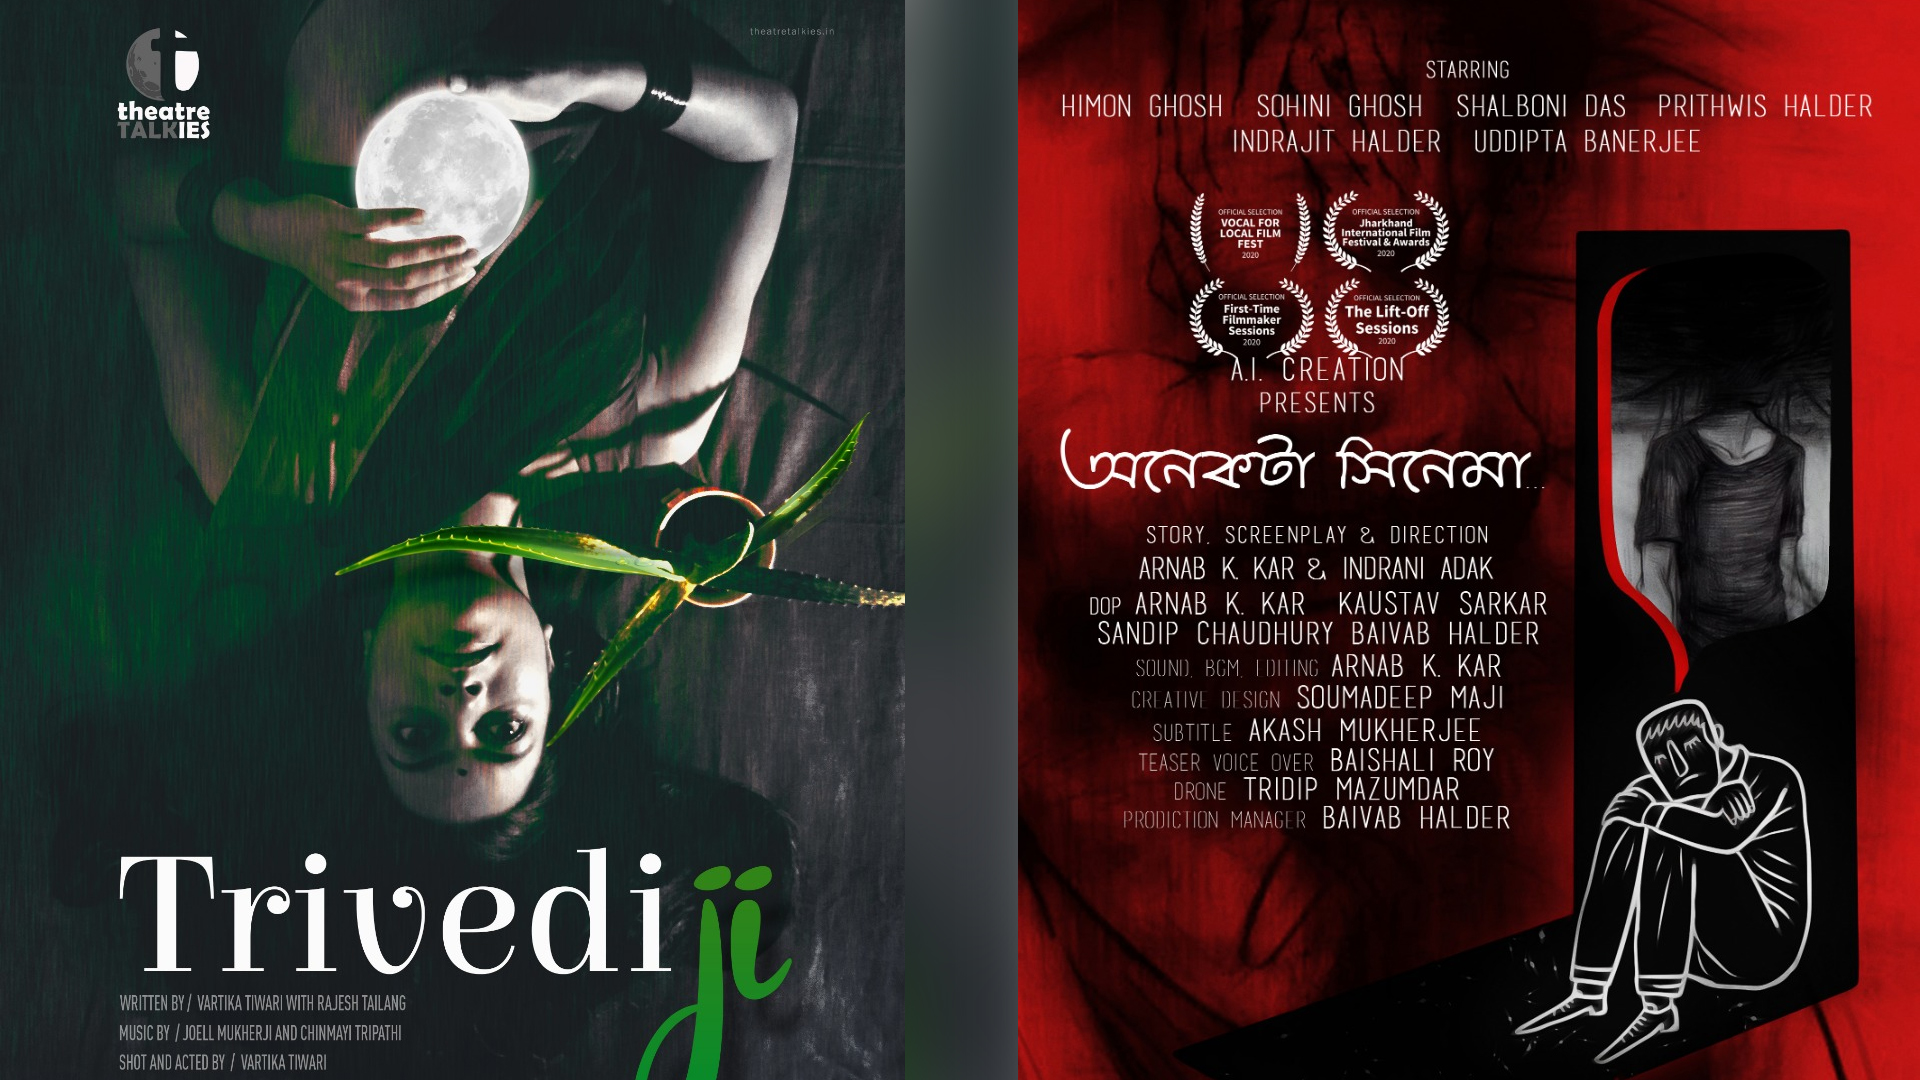 Trivedi ji directed by Rajesh Tailang now live on Bandra Film Festival One year to being caged- #Lockdownshots at the Bandra Film Festival